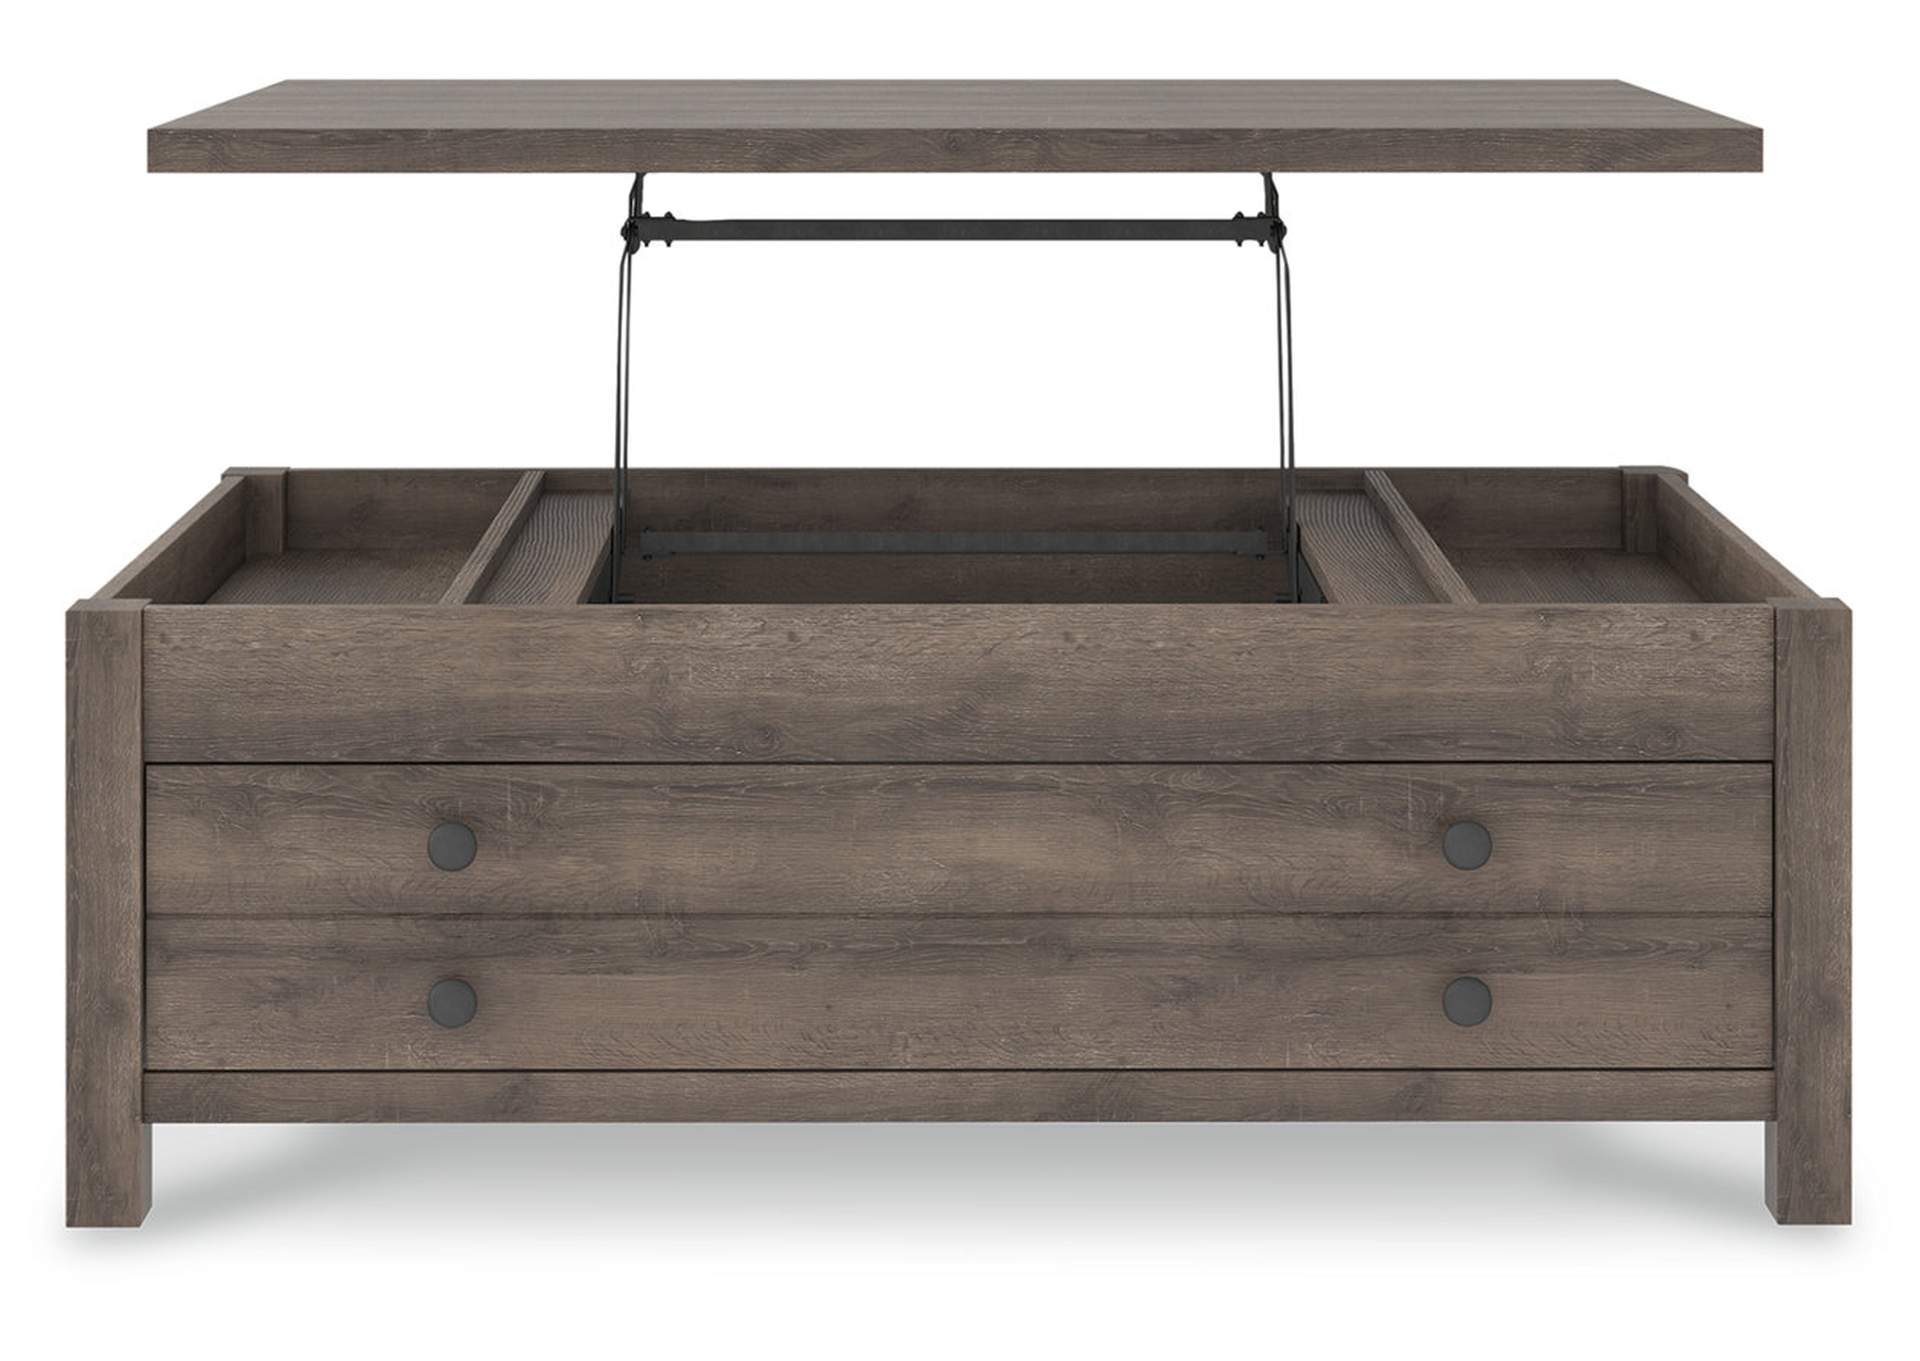 Arlenbry Coffee Table with Lift Top,Signature Design By Ashley